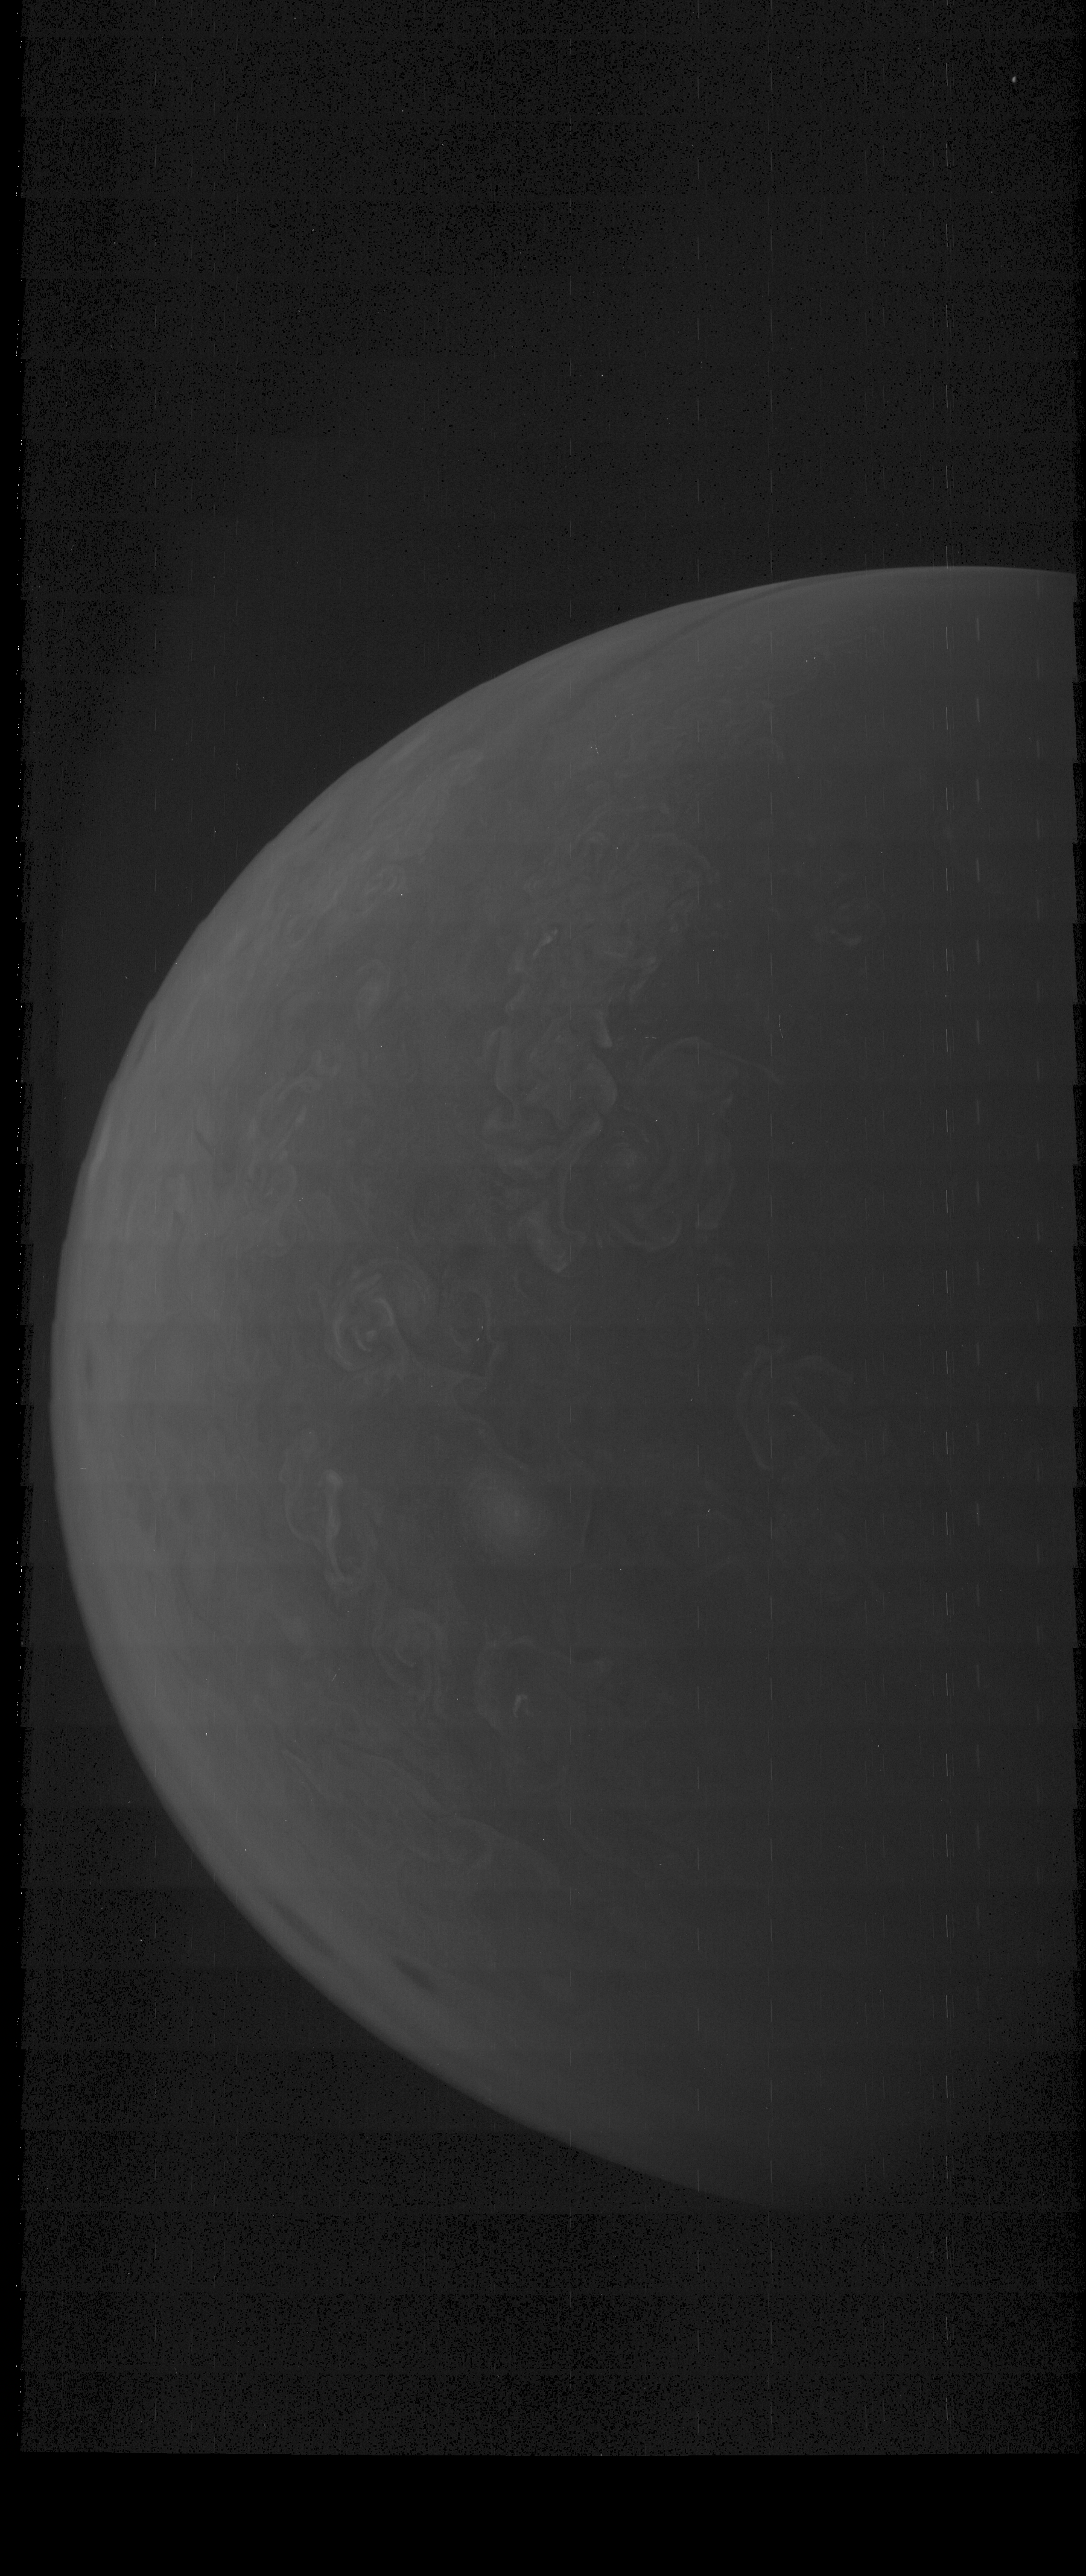 JNCE_2023212_53M00156_V01-raw_proc_hollow_sphere_m_pj_out.BMP_thumbnail_.png